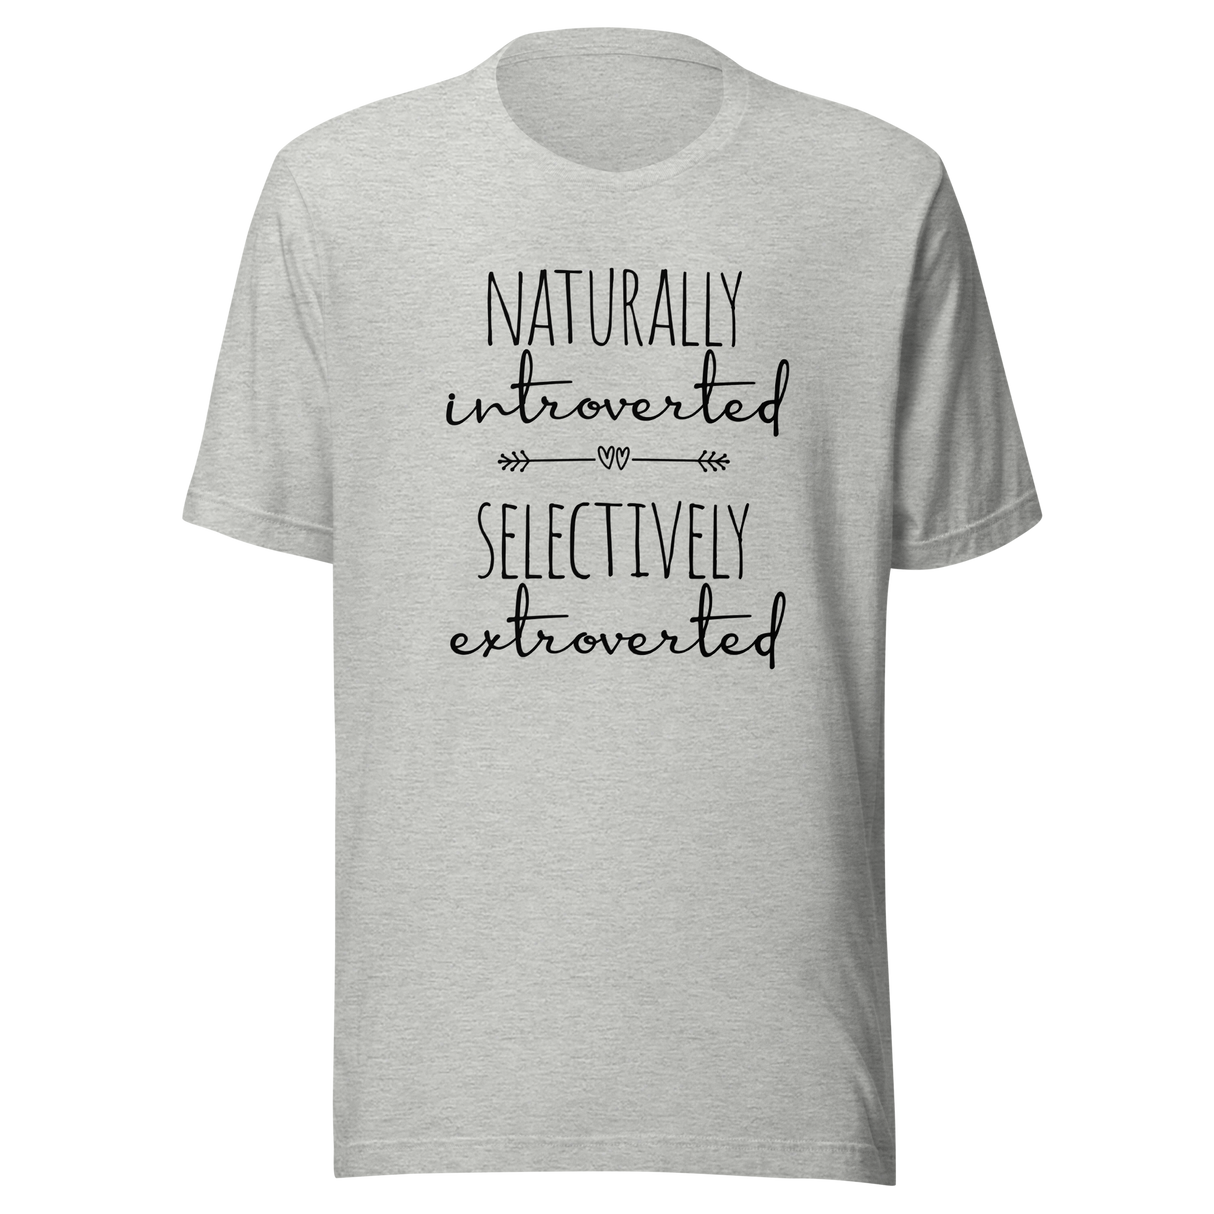 naturally-introverted-selectively-extroverted-nerd-tee-anti-t-shirt-funny-tee-t-shirt-tee#color_athletic-heather